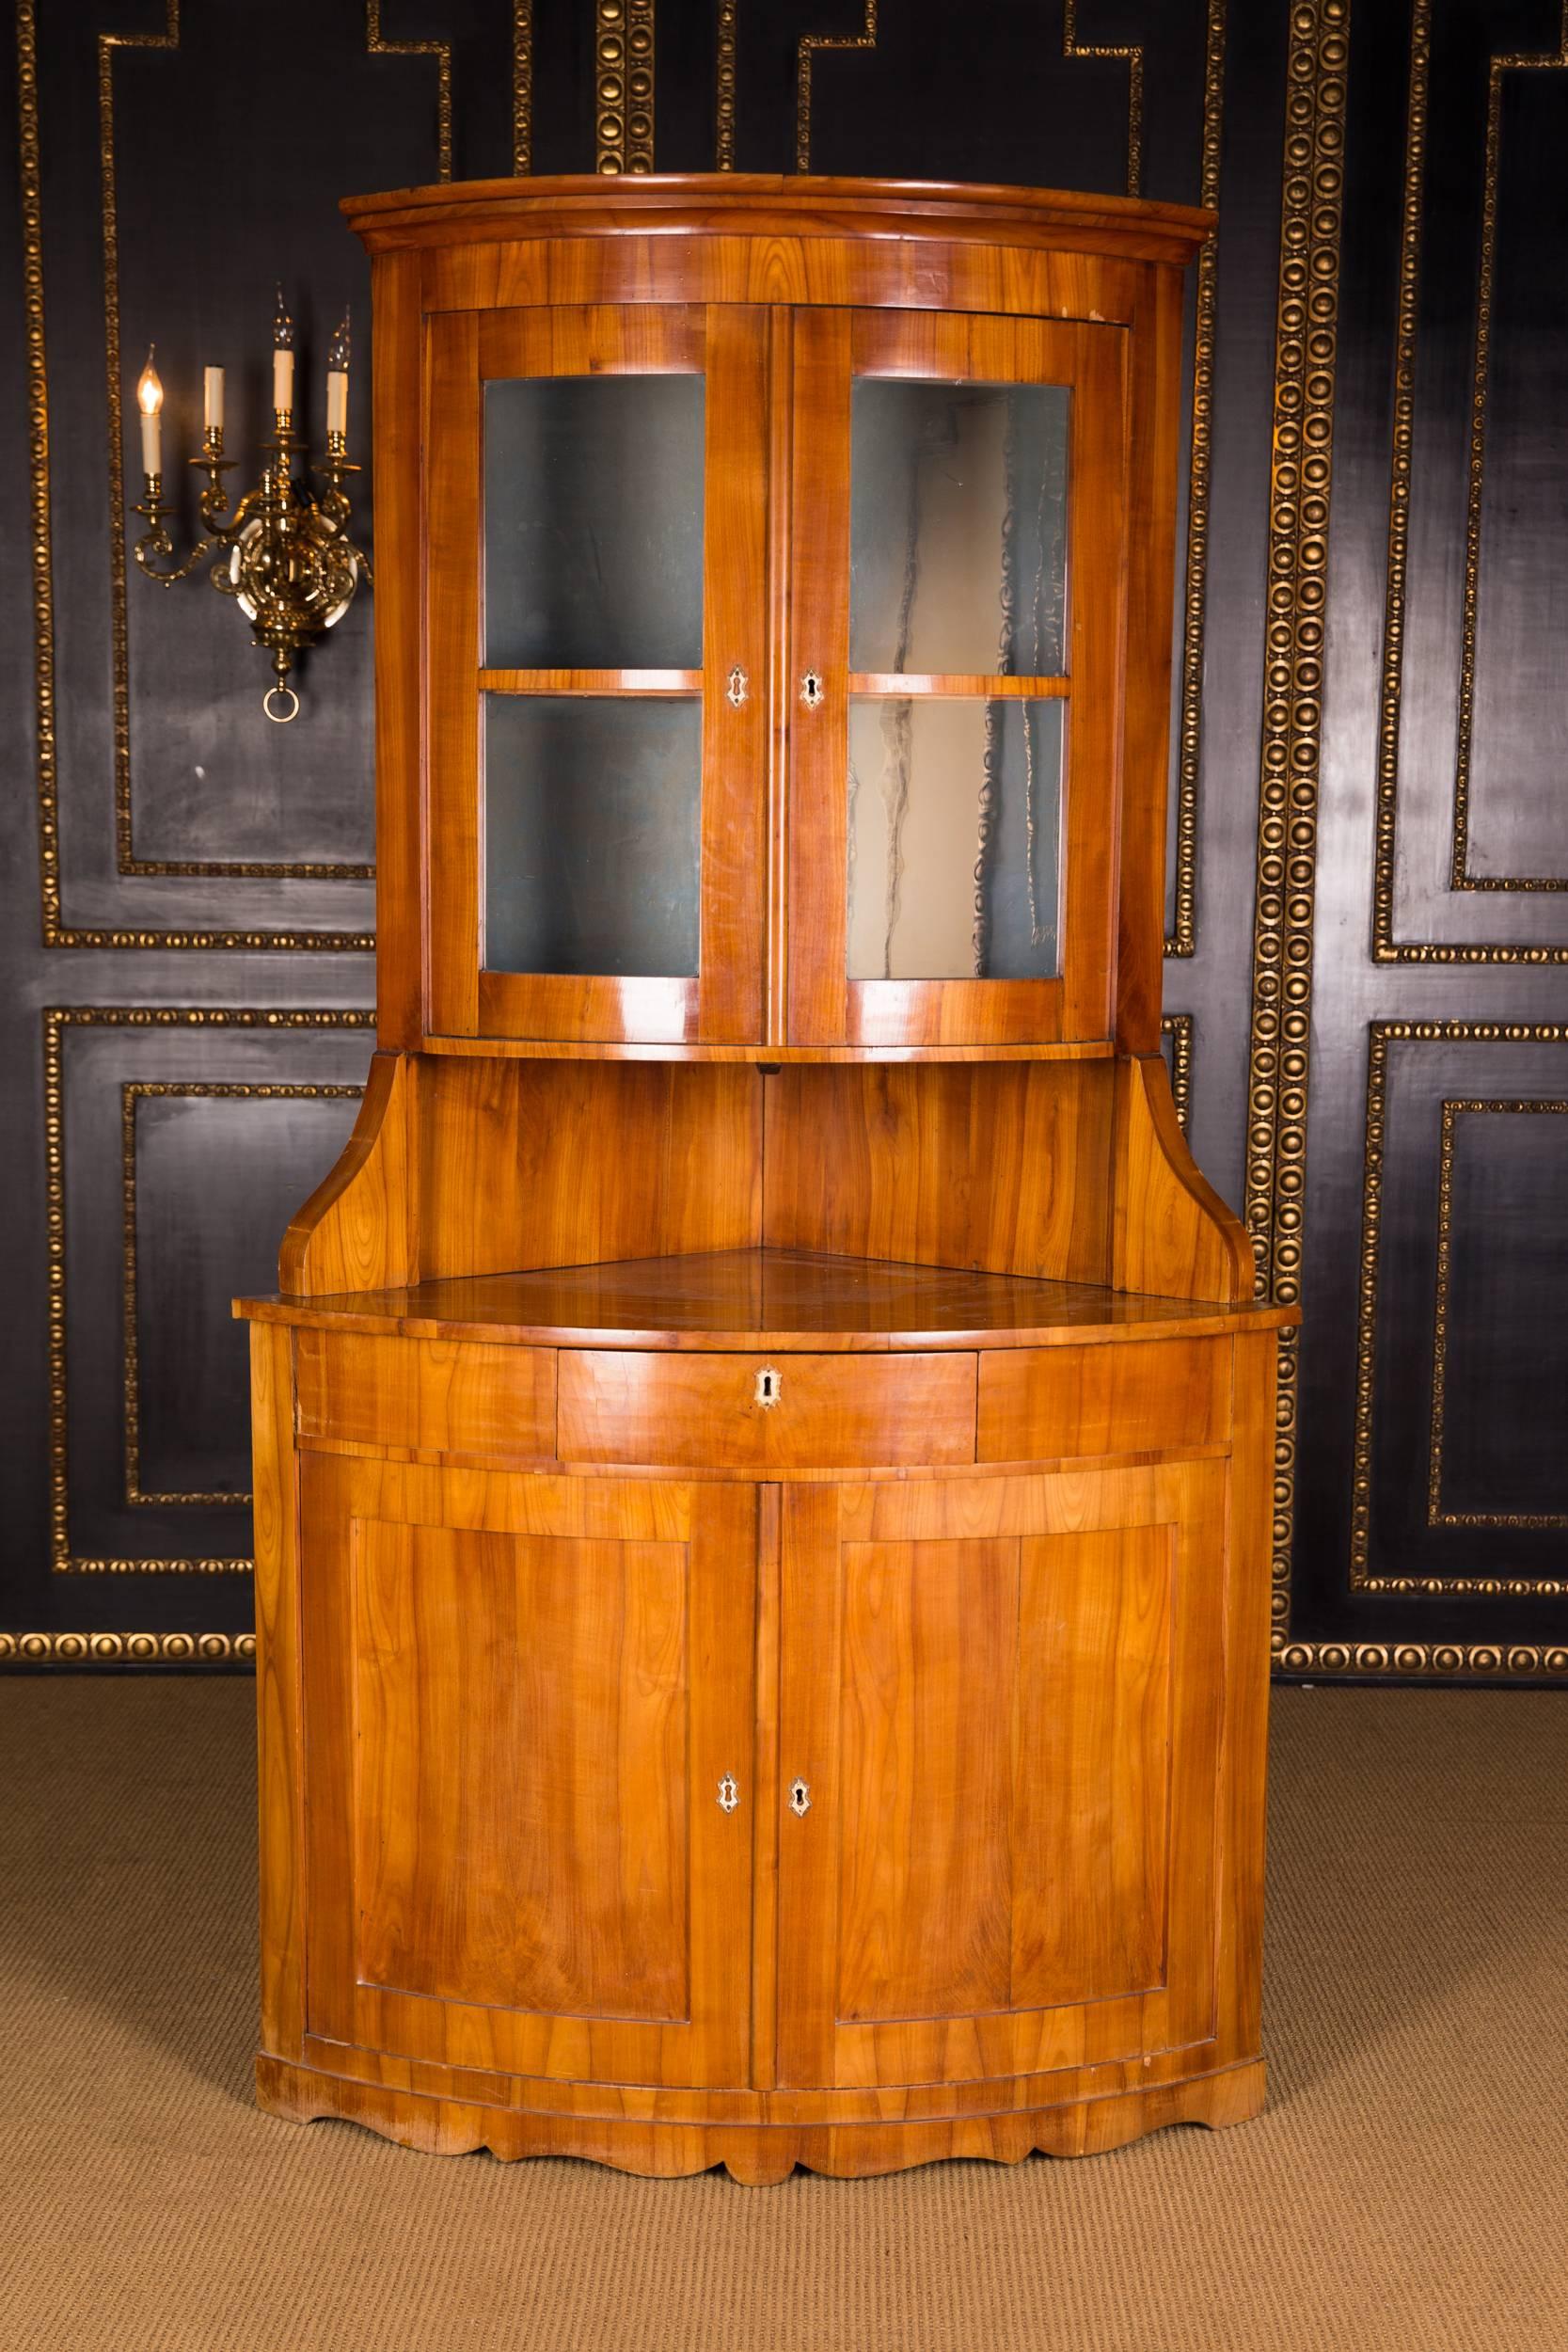 Cherry on pinewood. The corner vitrine is in an unrestored condition with a wonderful warm patina grown over decades. Such Biedermeier corner showcases in cherry are quite rare.
   